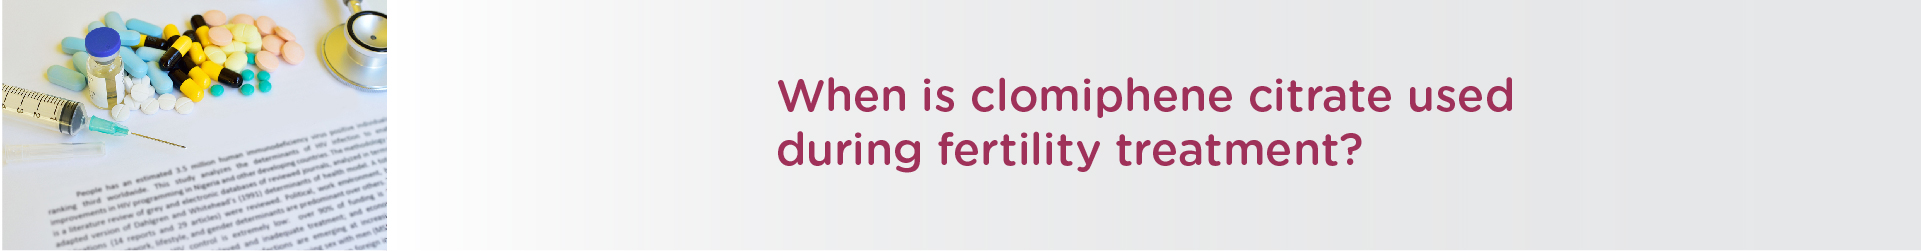 When Is Clomiphene Citrate Used During Fertility Treatment?